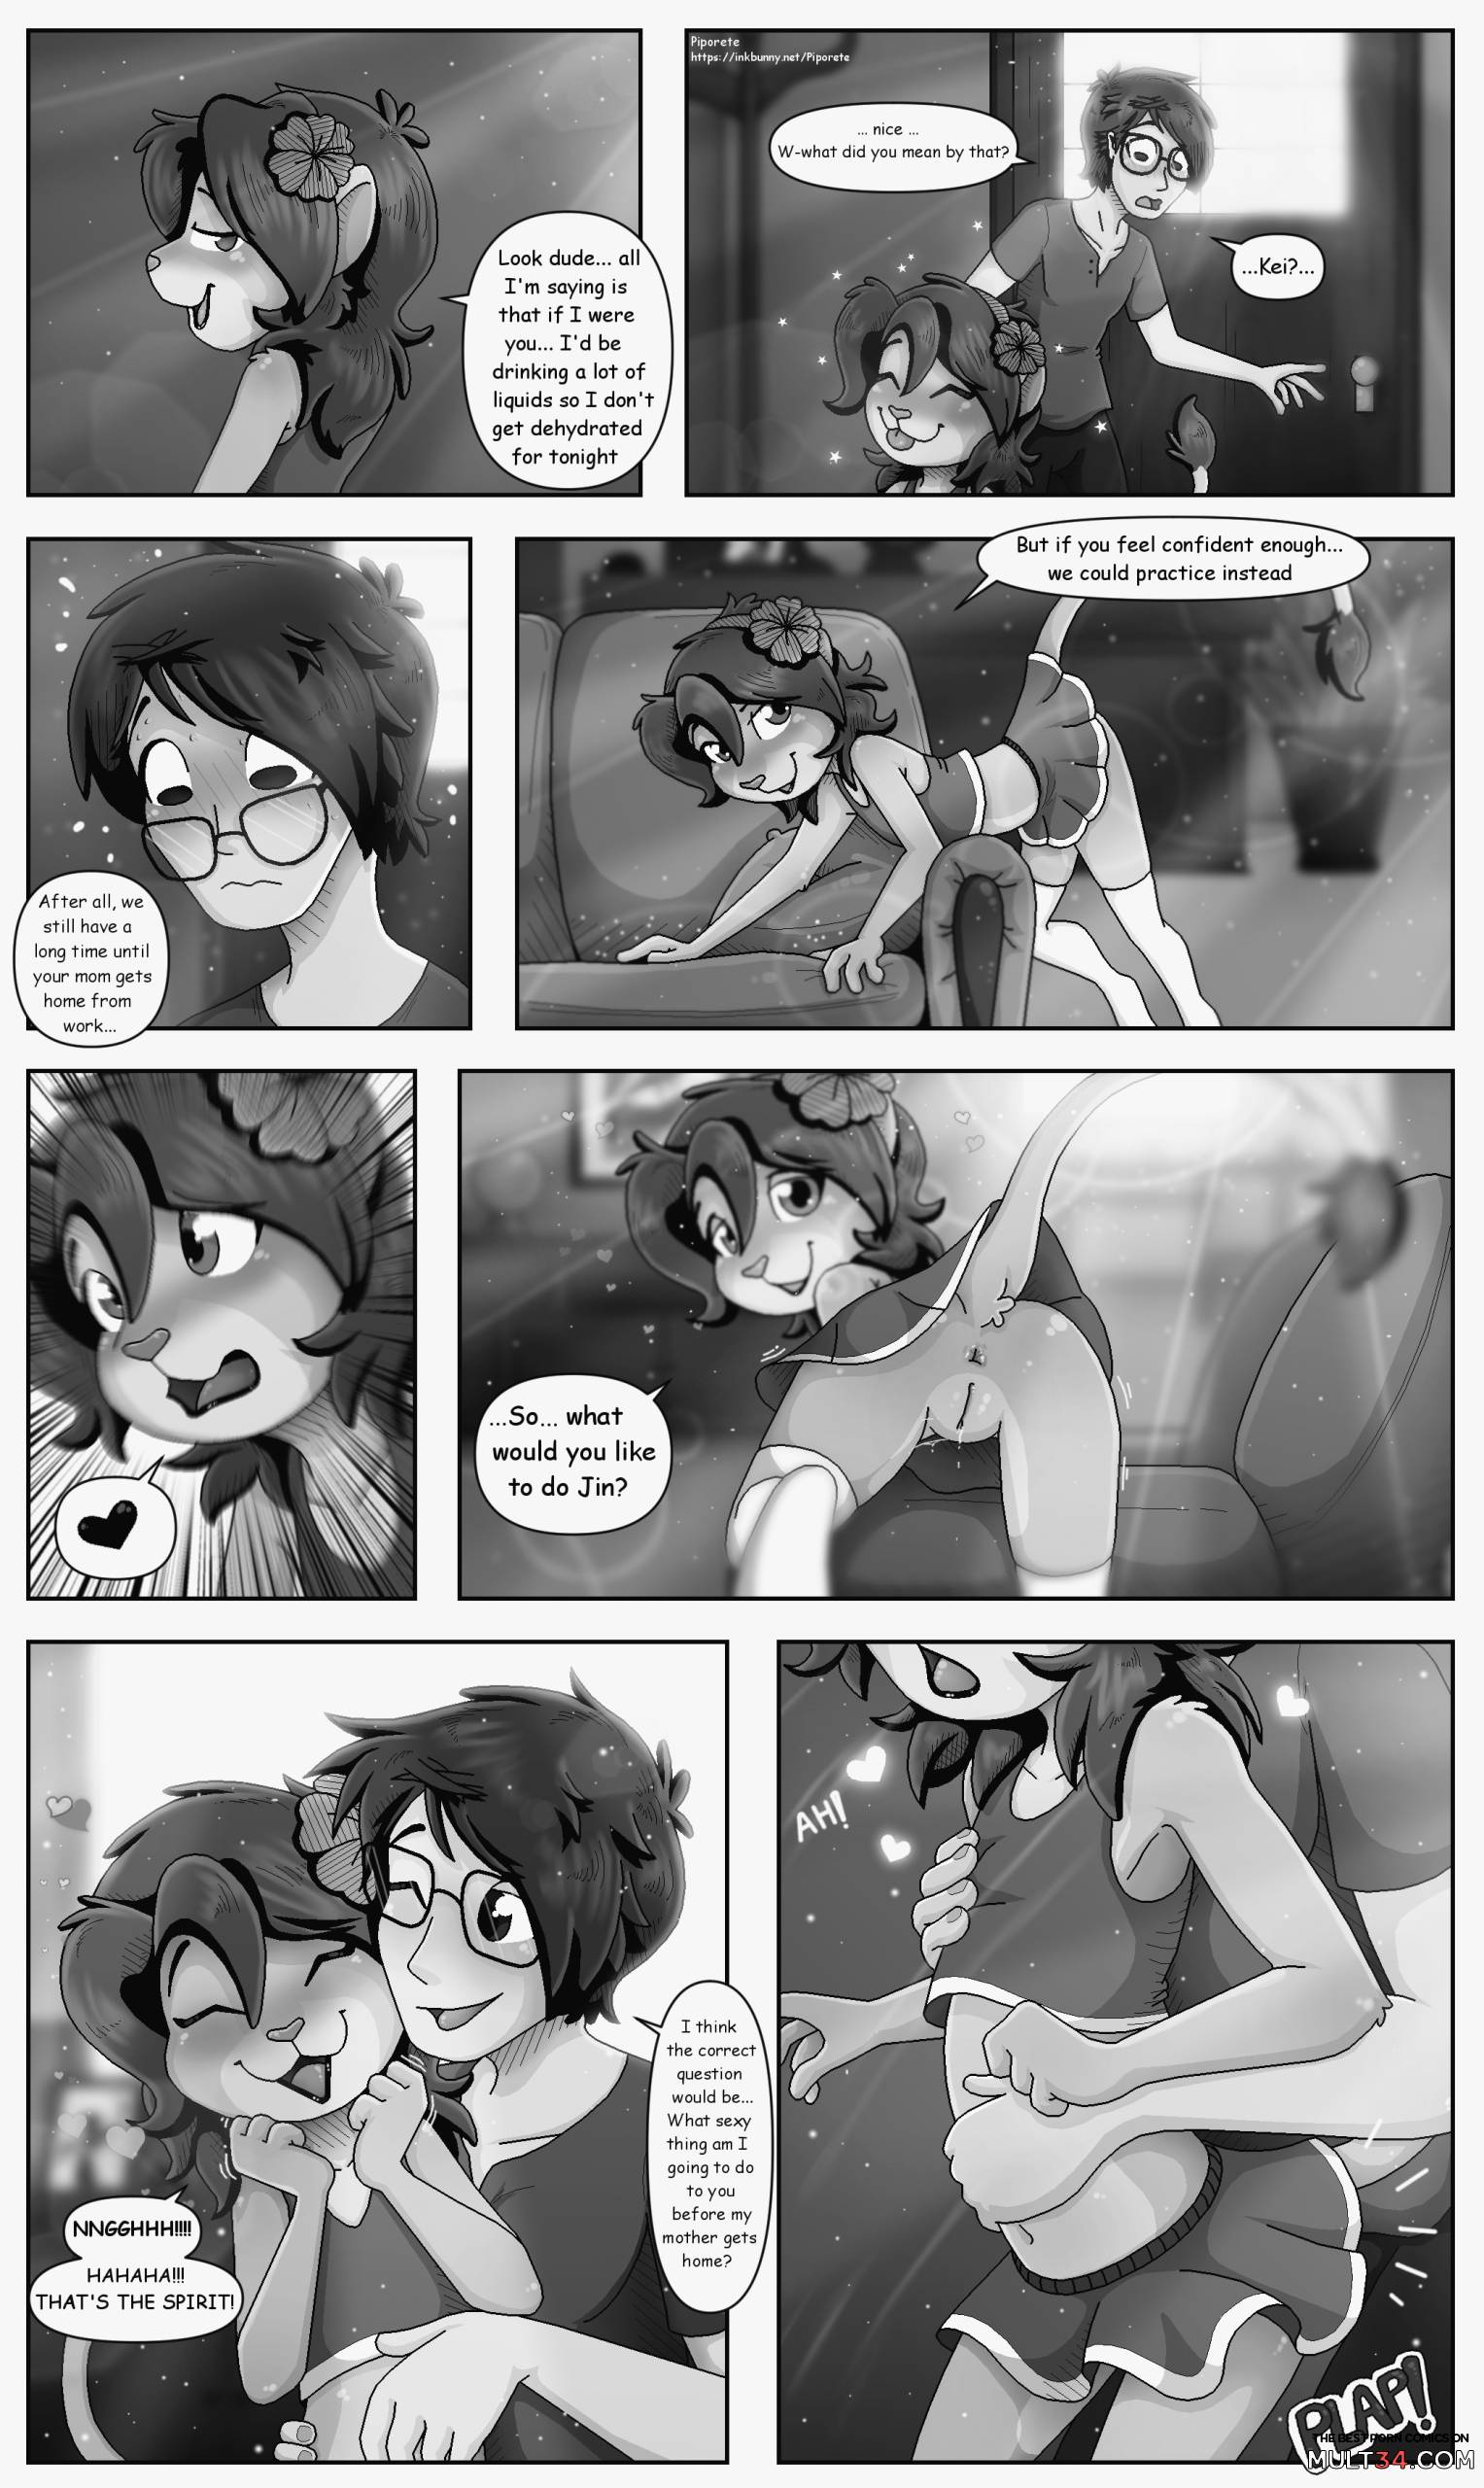 Keiko and Jin - Chapter 1 - 3 page 62